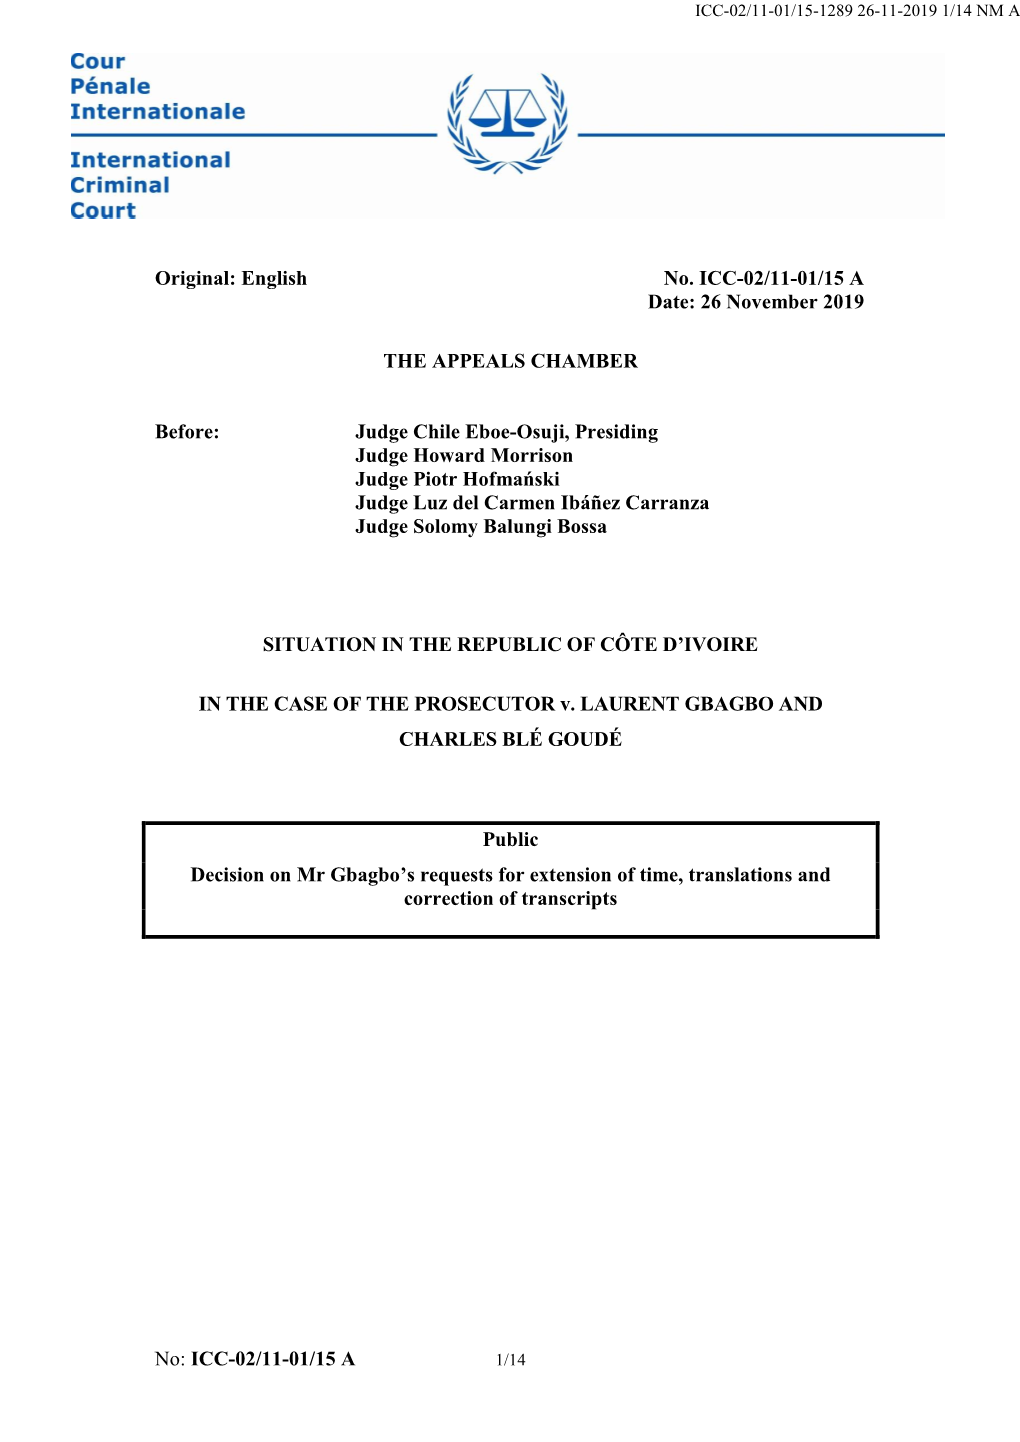 English No. ICC-02/11-01/15 a Date: 26 November 2019 the APPEALS CHAMBER Before